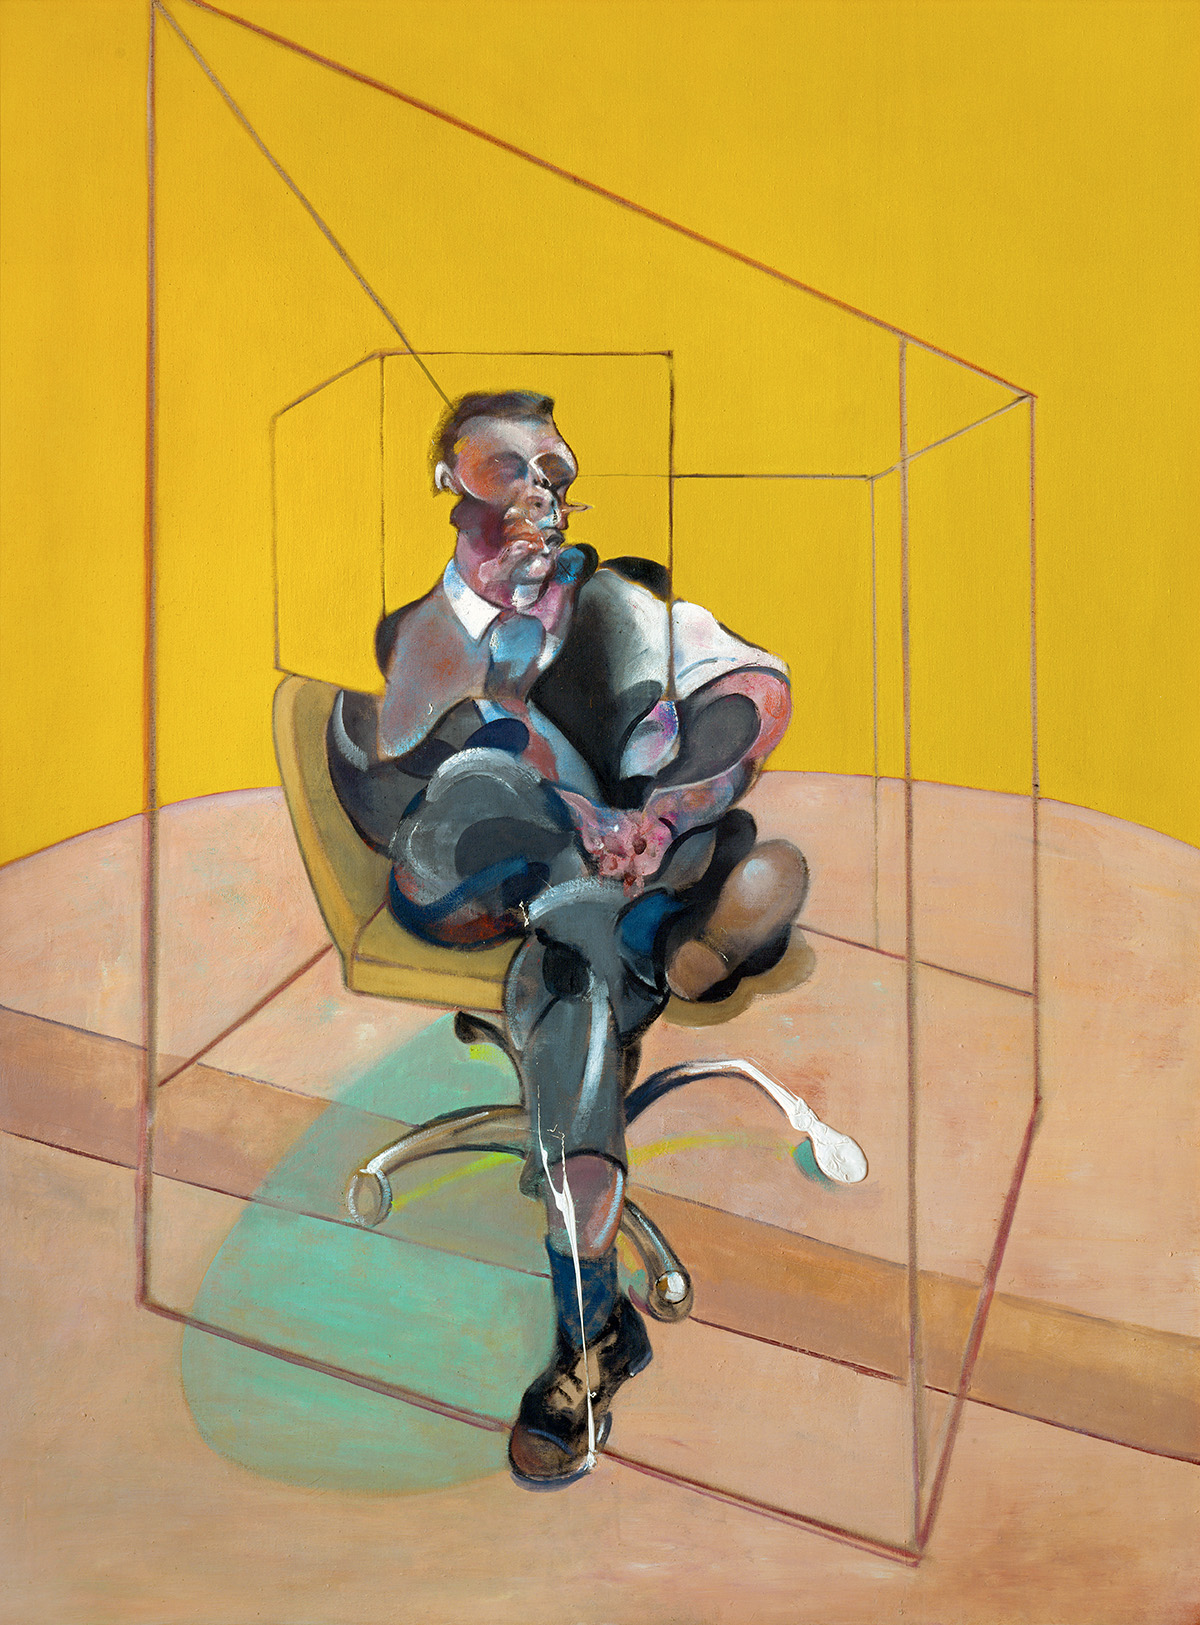 Study for Portrait, 1971. Oil on canvas. CR no. 71-07. © The Estate of Francis Bacon / DACS London 2022. All rights reserved.